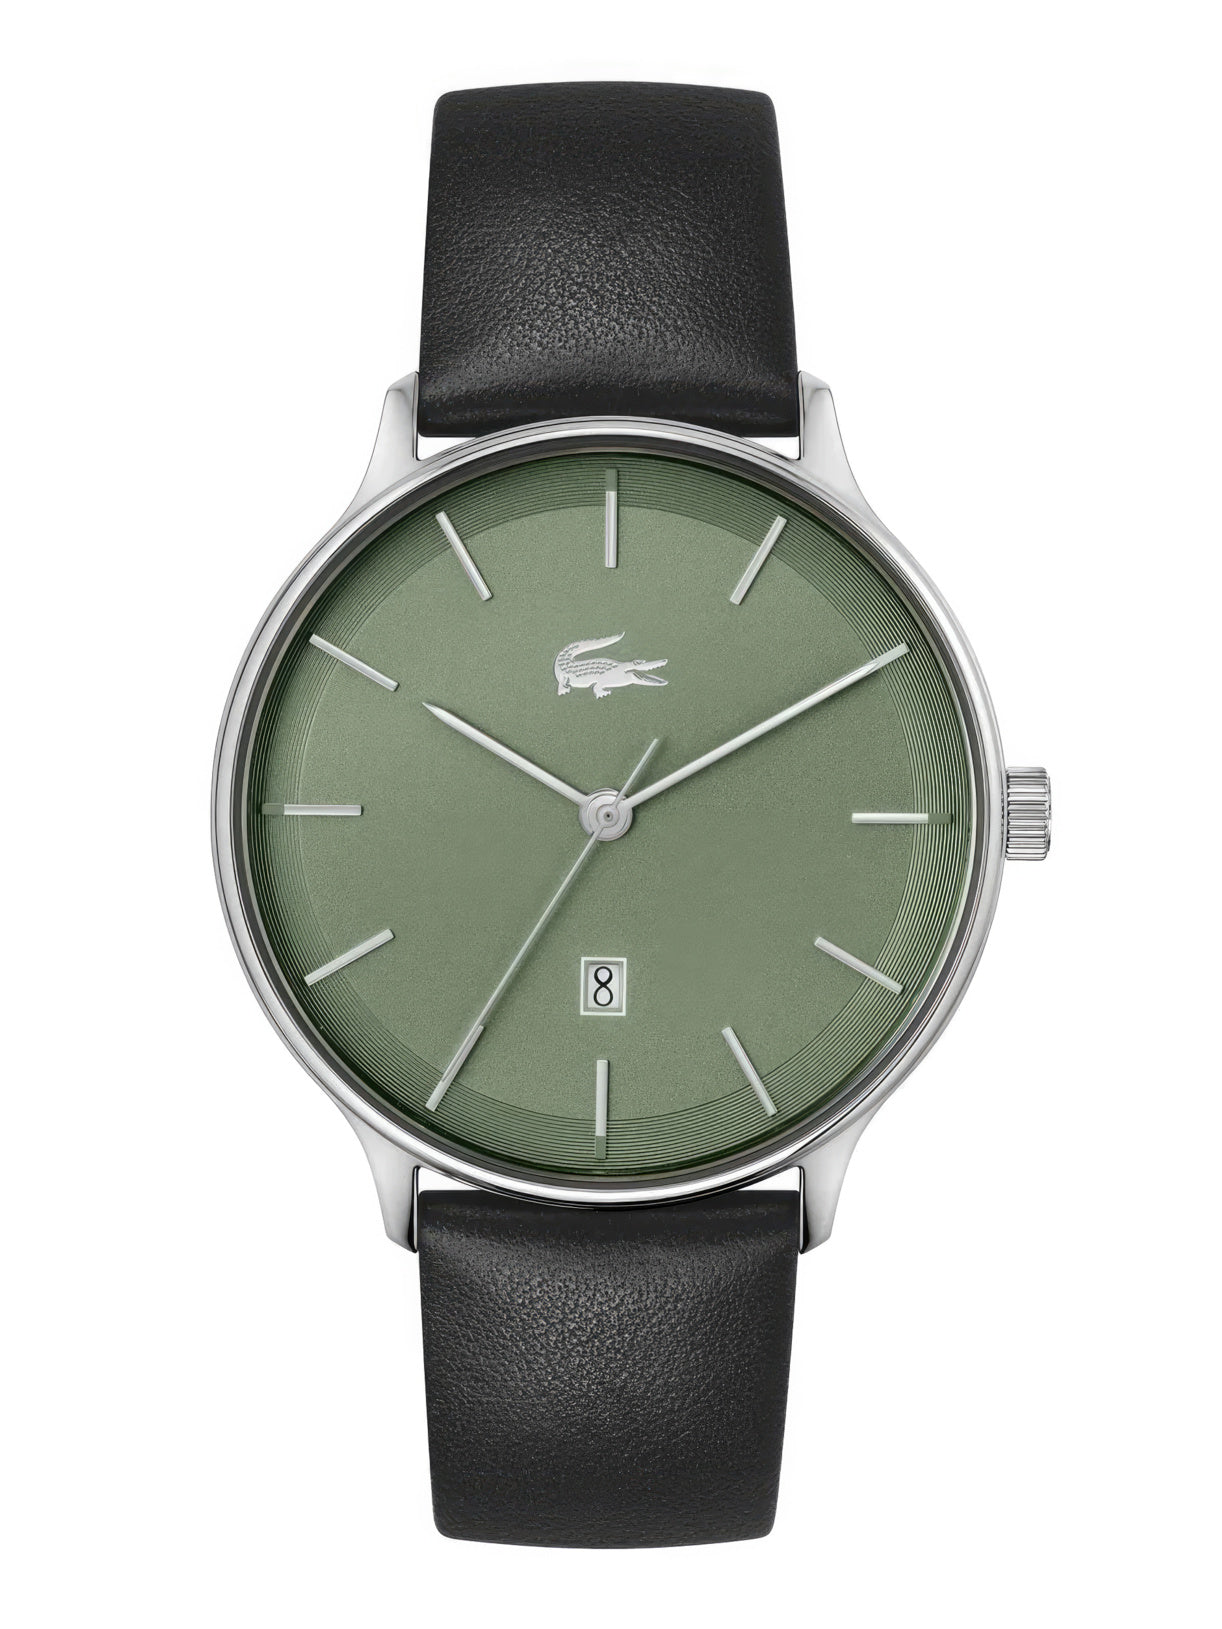 Lacoste Club Olive Dial Watch 2011225 with black leather strap